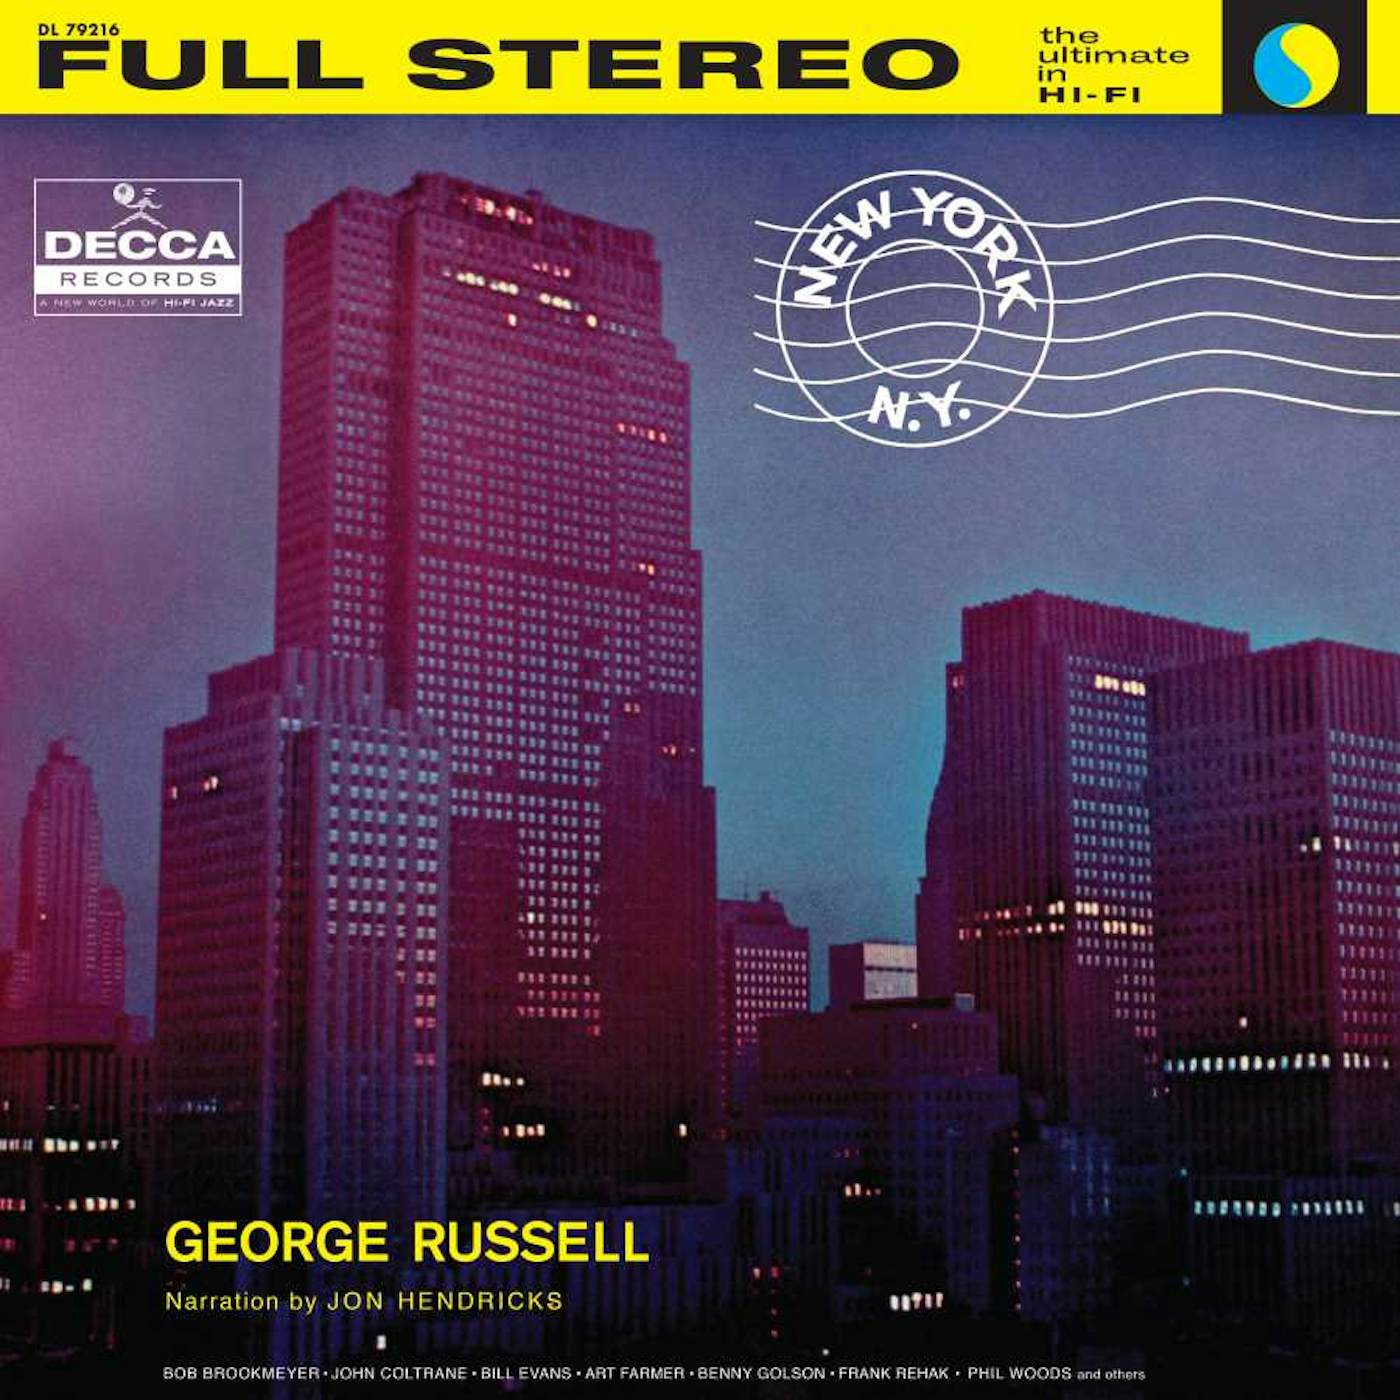 George Russell NEW YORK, NY (VERVE ACOUSTIC SOUNDS SERIES) Vinyl Record